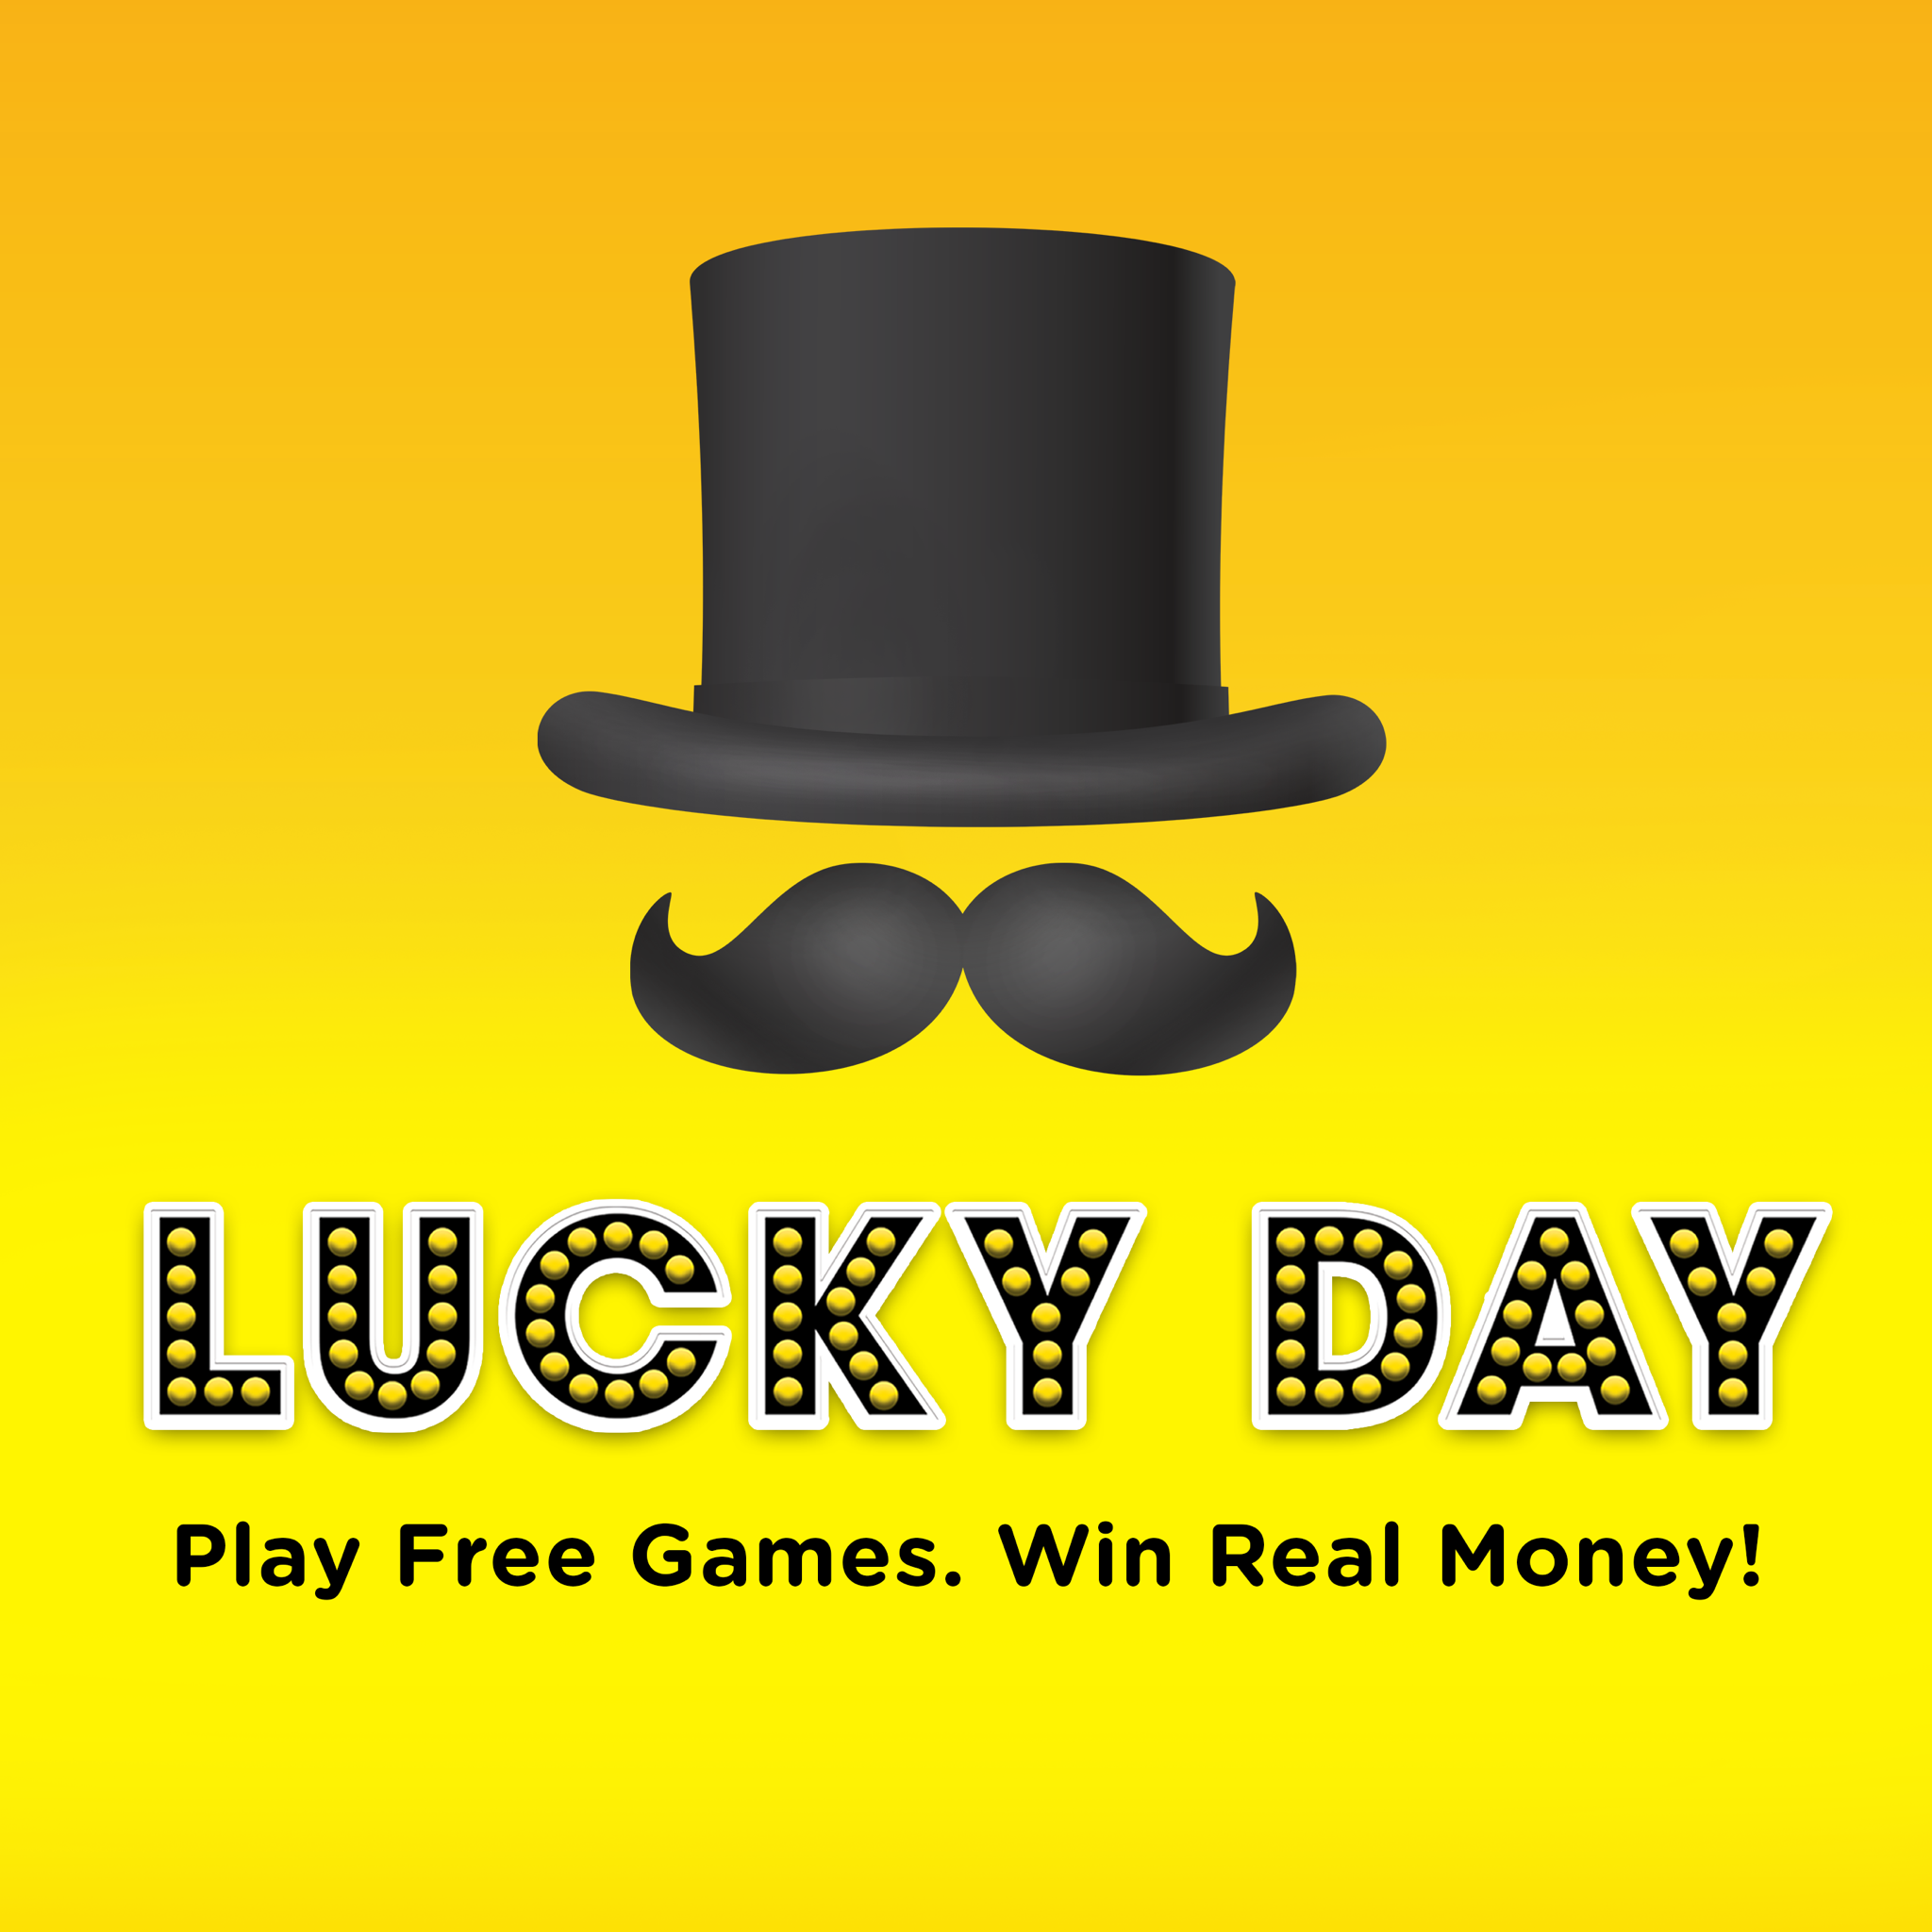 Games Earn Real Money Lucky win luckyday app money lotto real link games